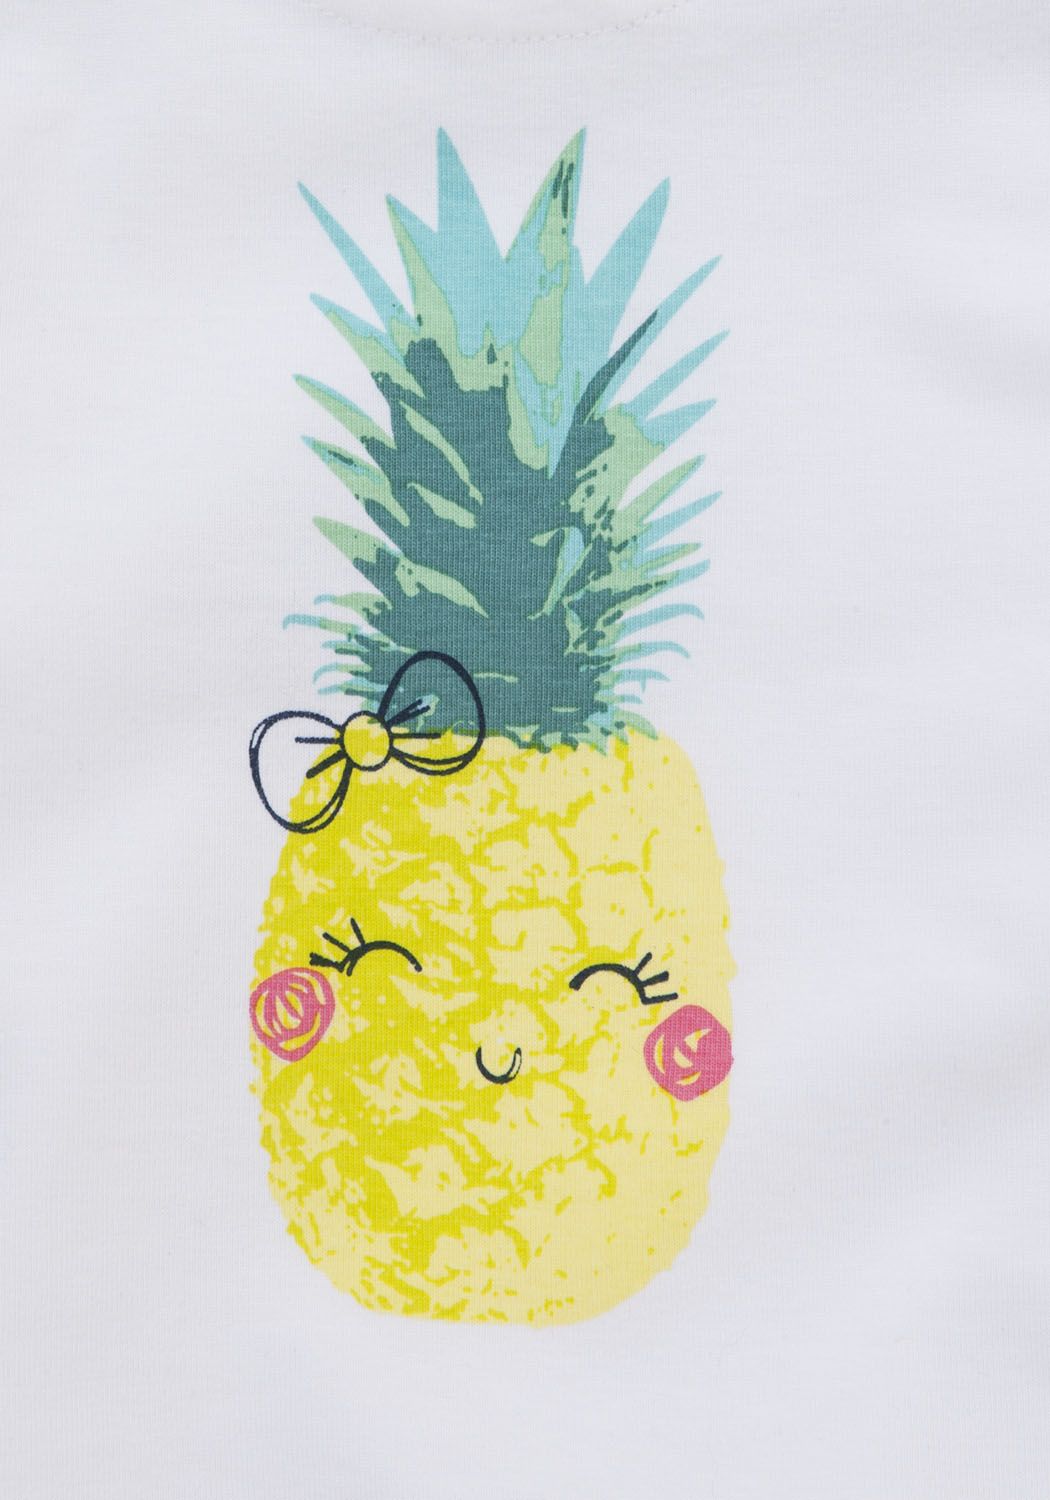 Cute Girly iPhone Wallpaper Pineapple With Image